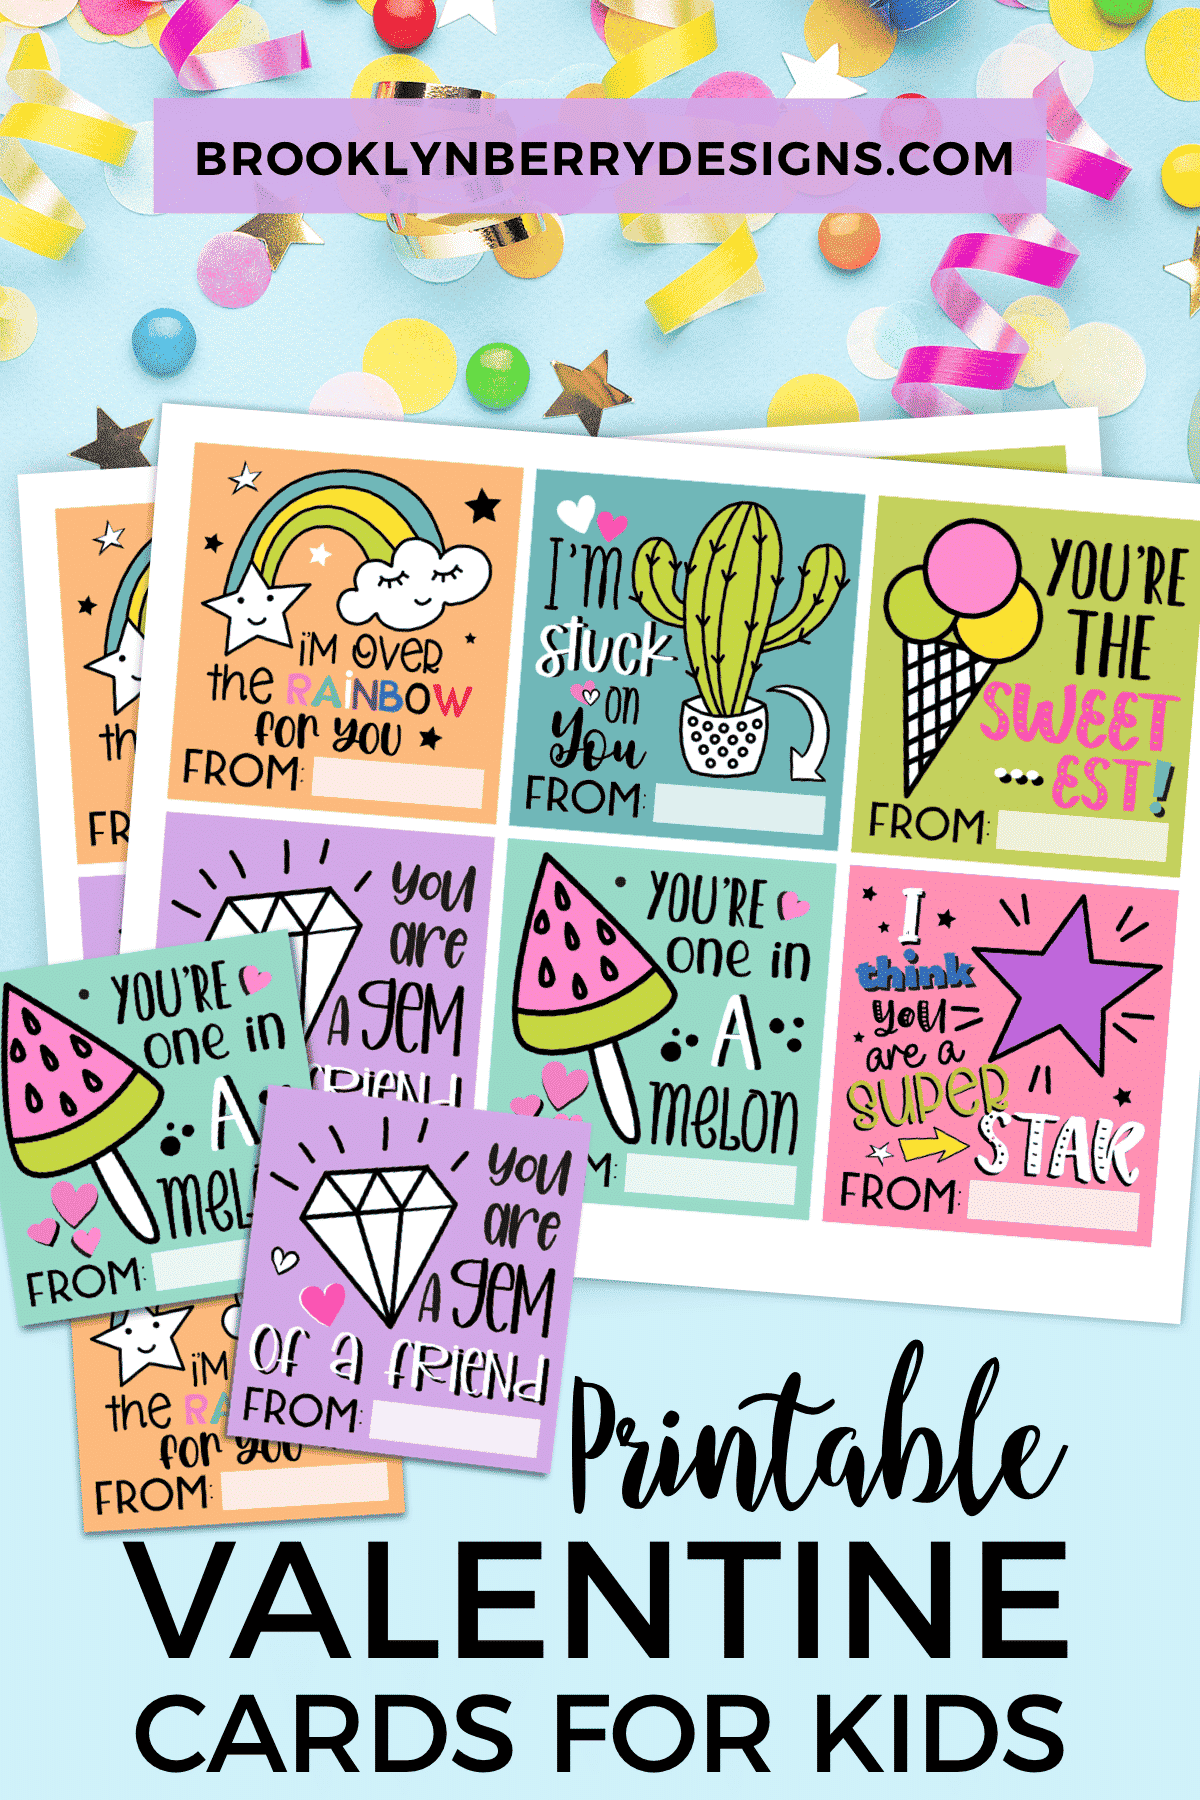 Looking for super cute valentines that are affordable and don't require you to go to the store, or even leave the house? These free printable valentines for kids are so easy. All you need is a printer and scissors to make as many of these valentines as you need! via @brookeberry